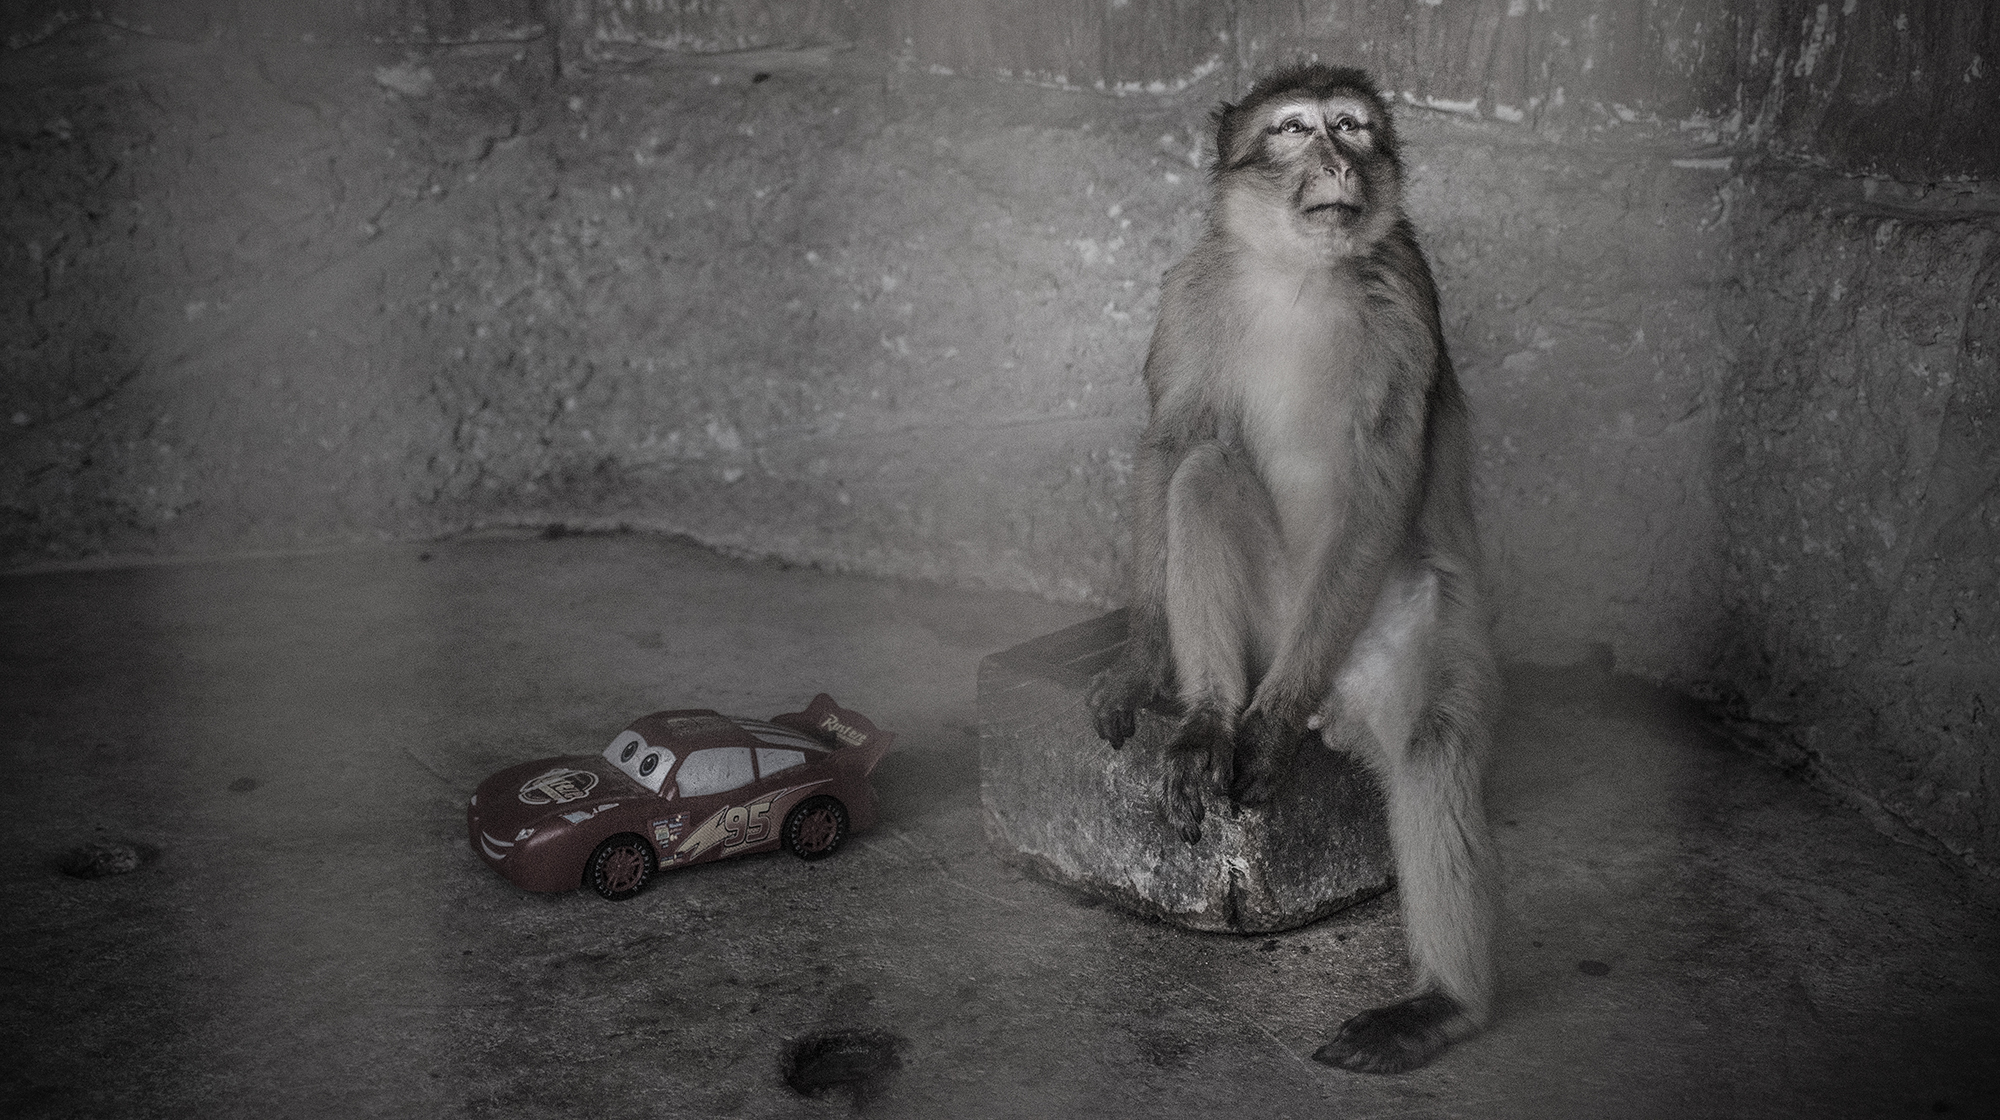 A monkey standing in a dark and dingy enclosure with a toy car on the floor next to it